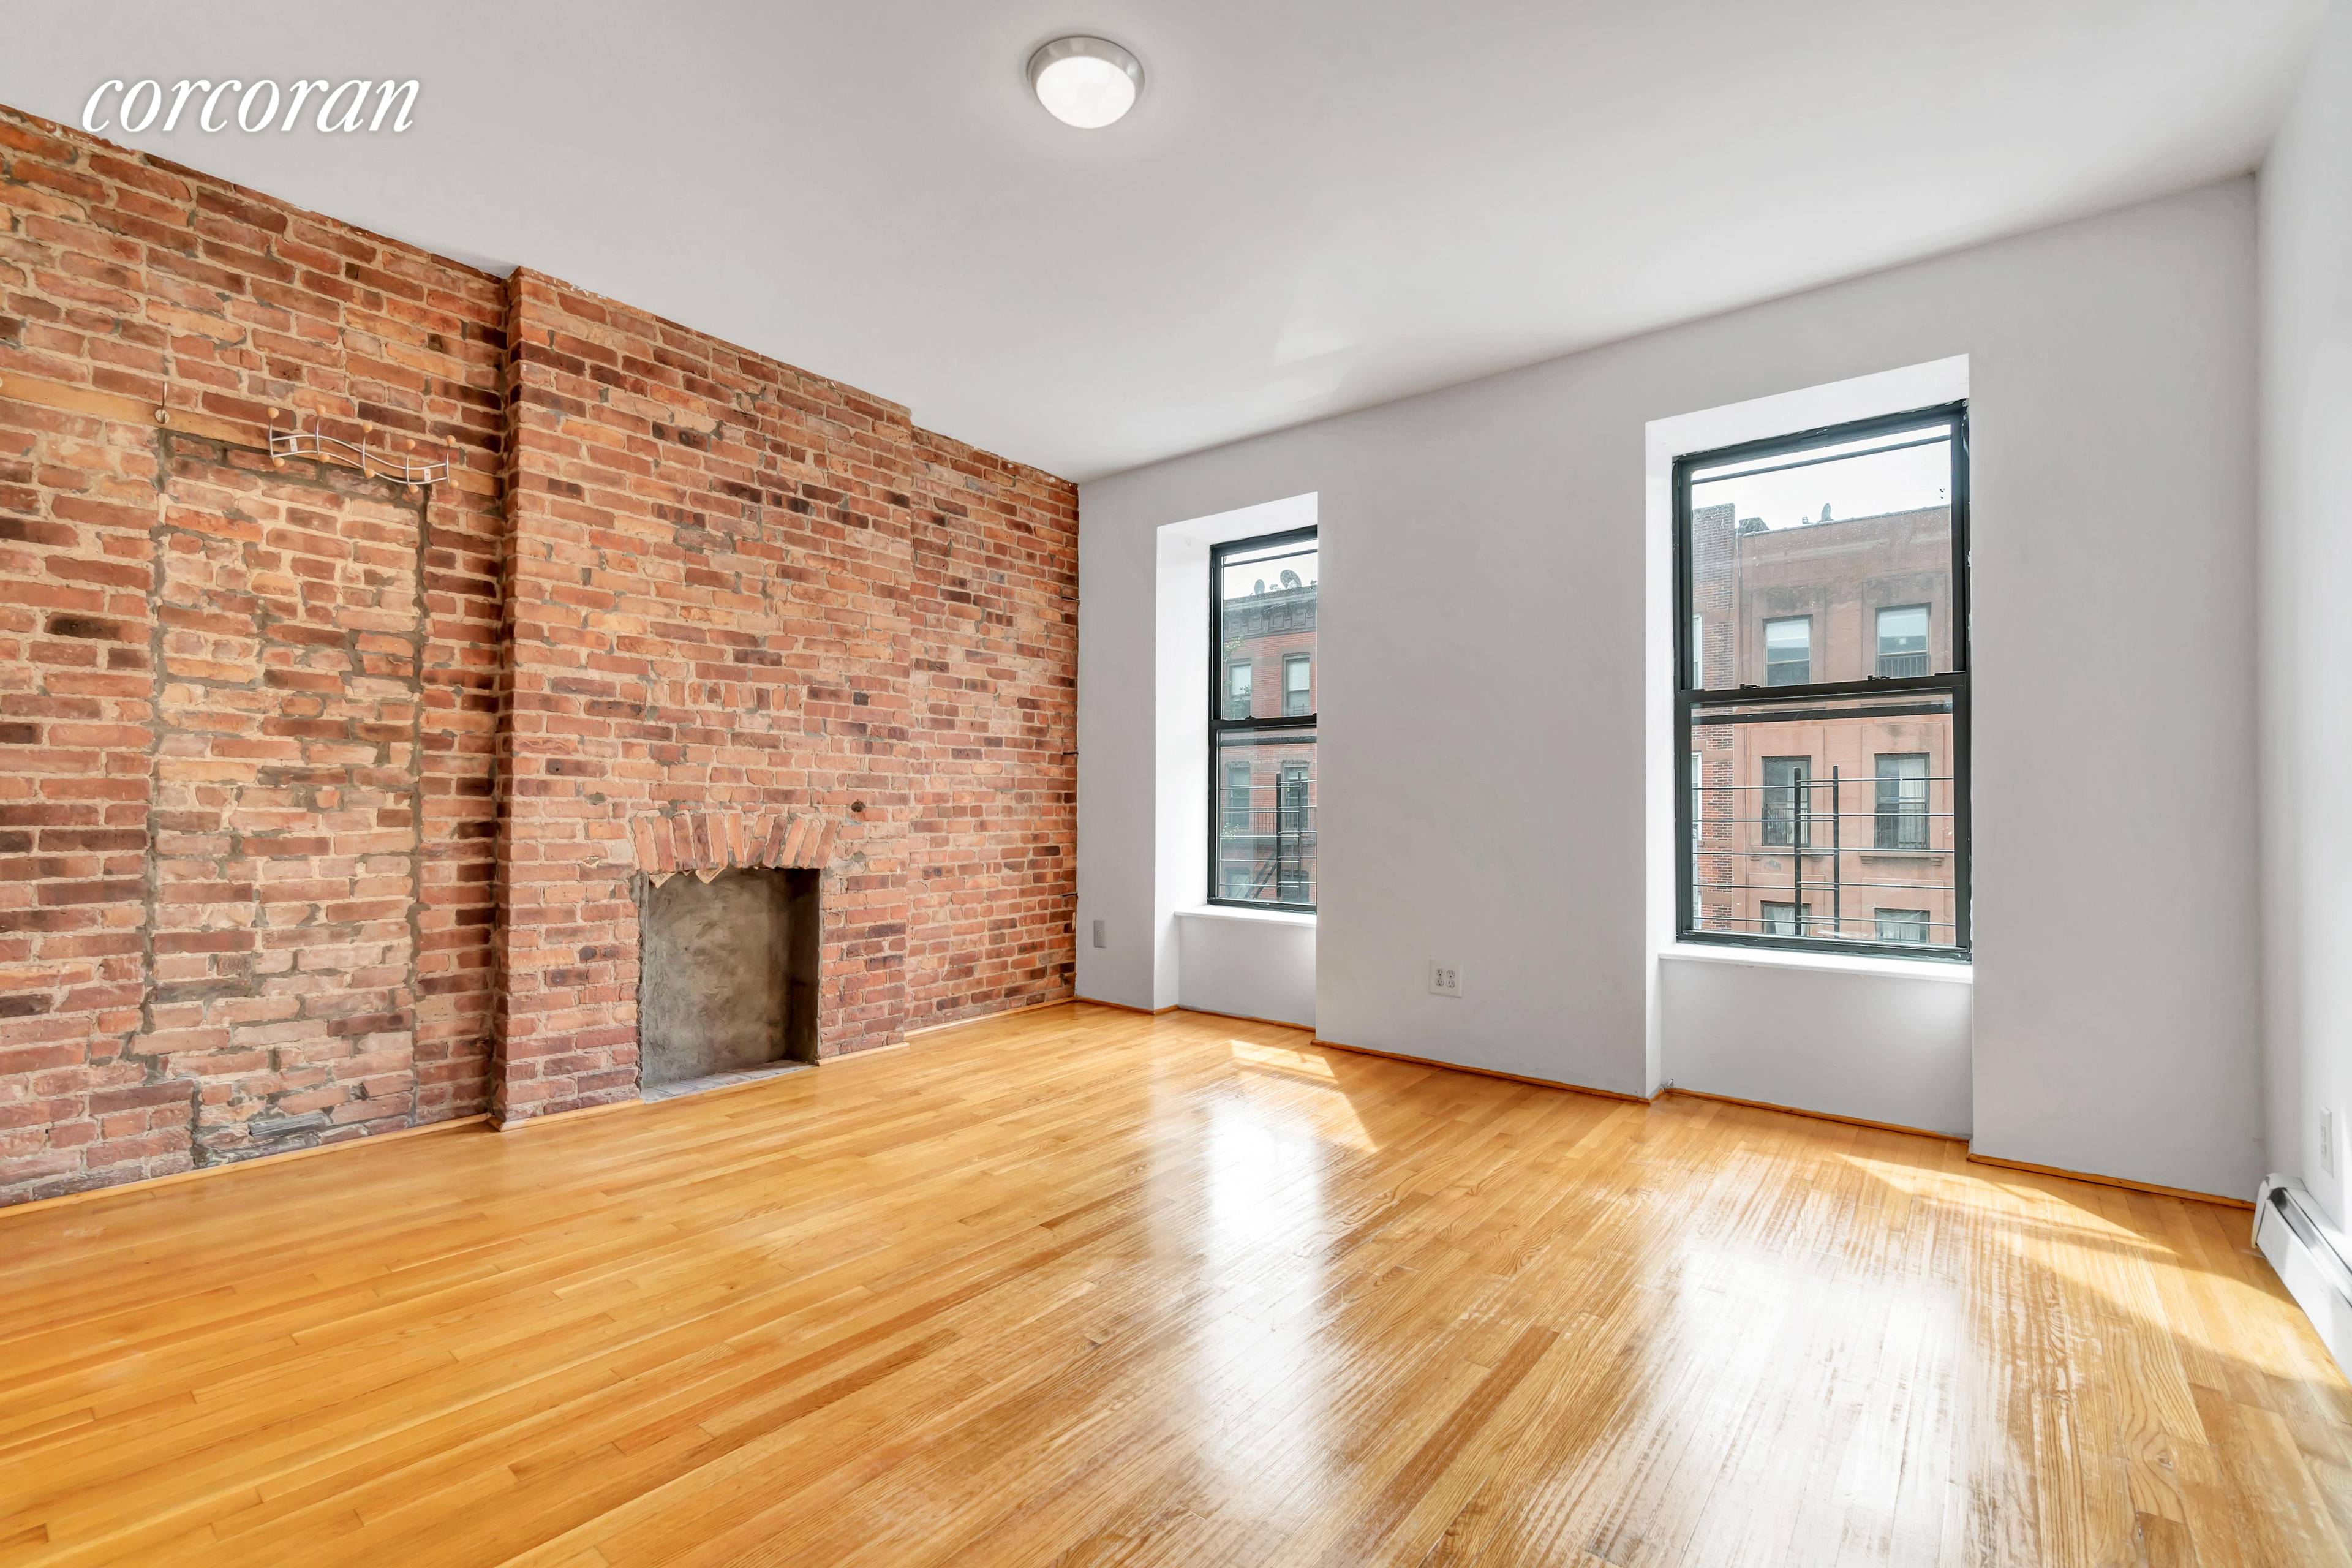 151 5th Ave 3Three bedroom apartment for rent in Park Slope.